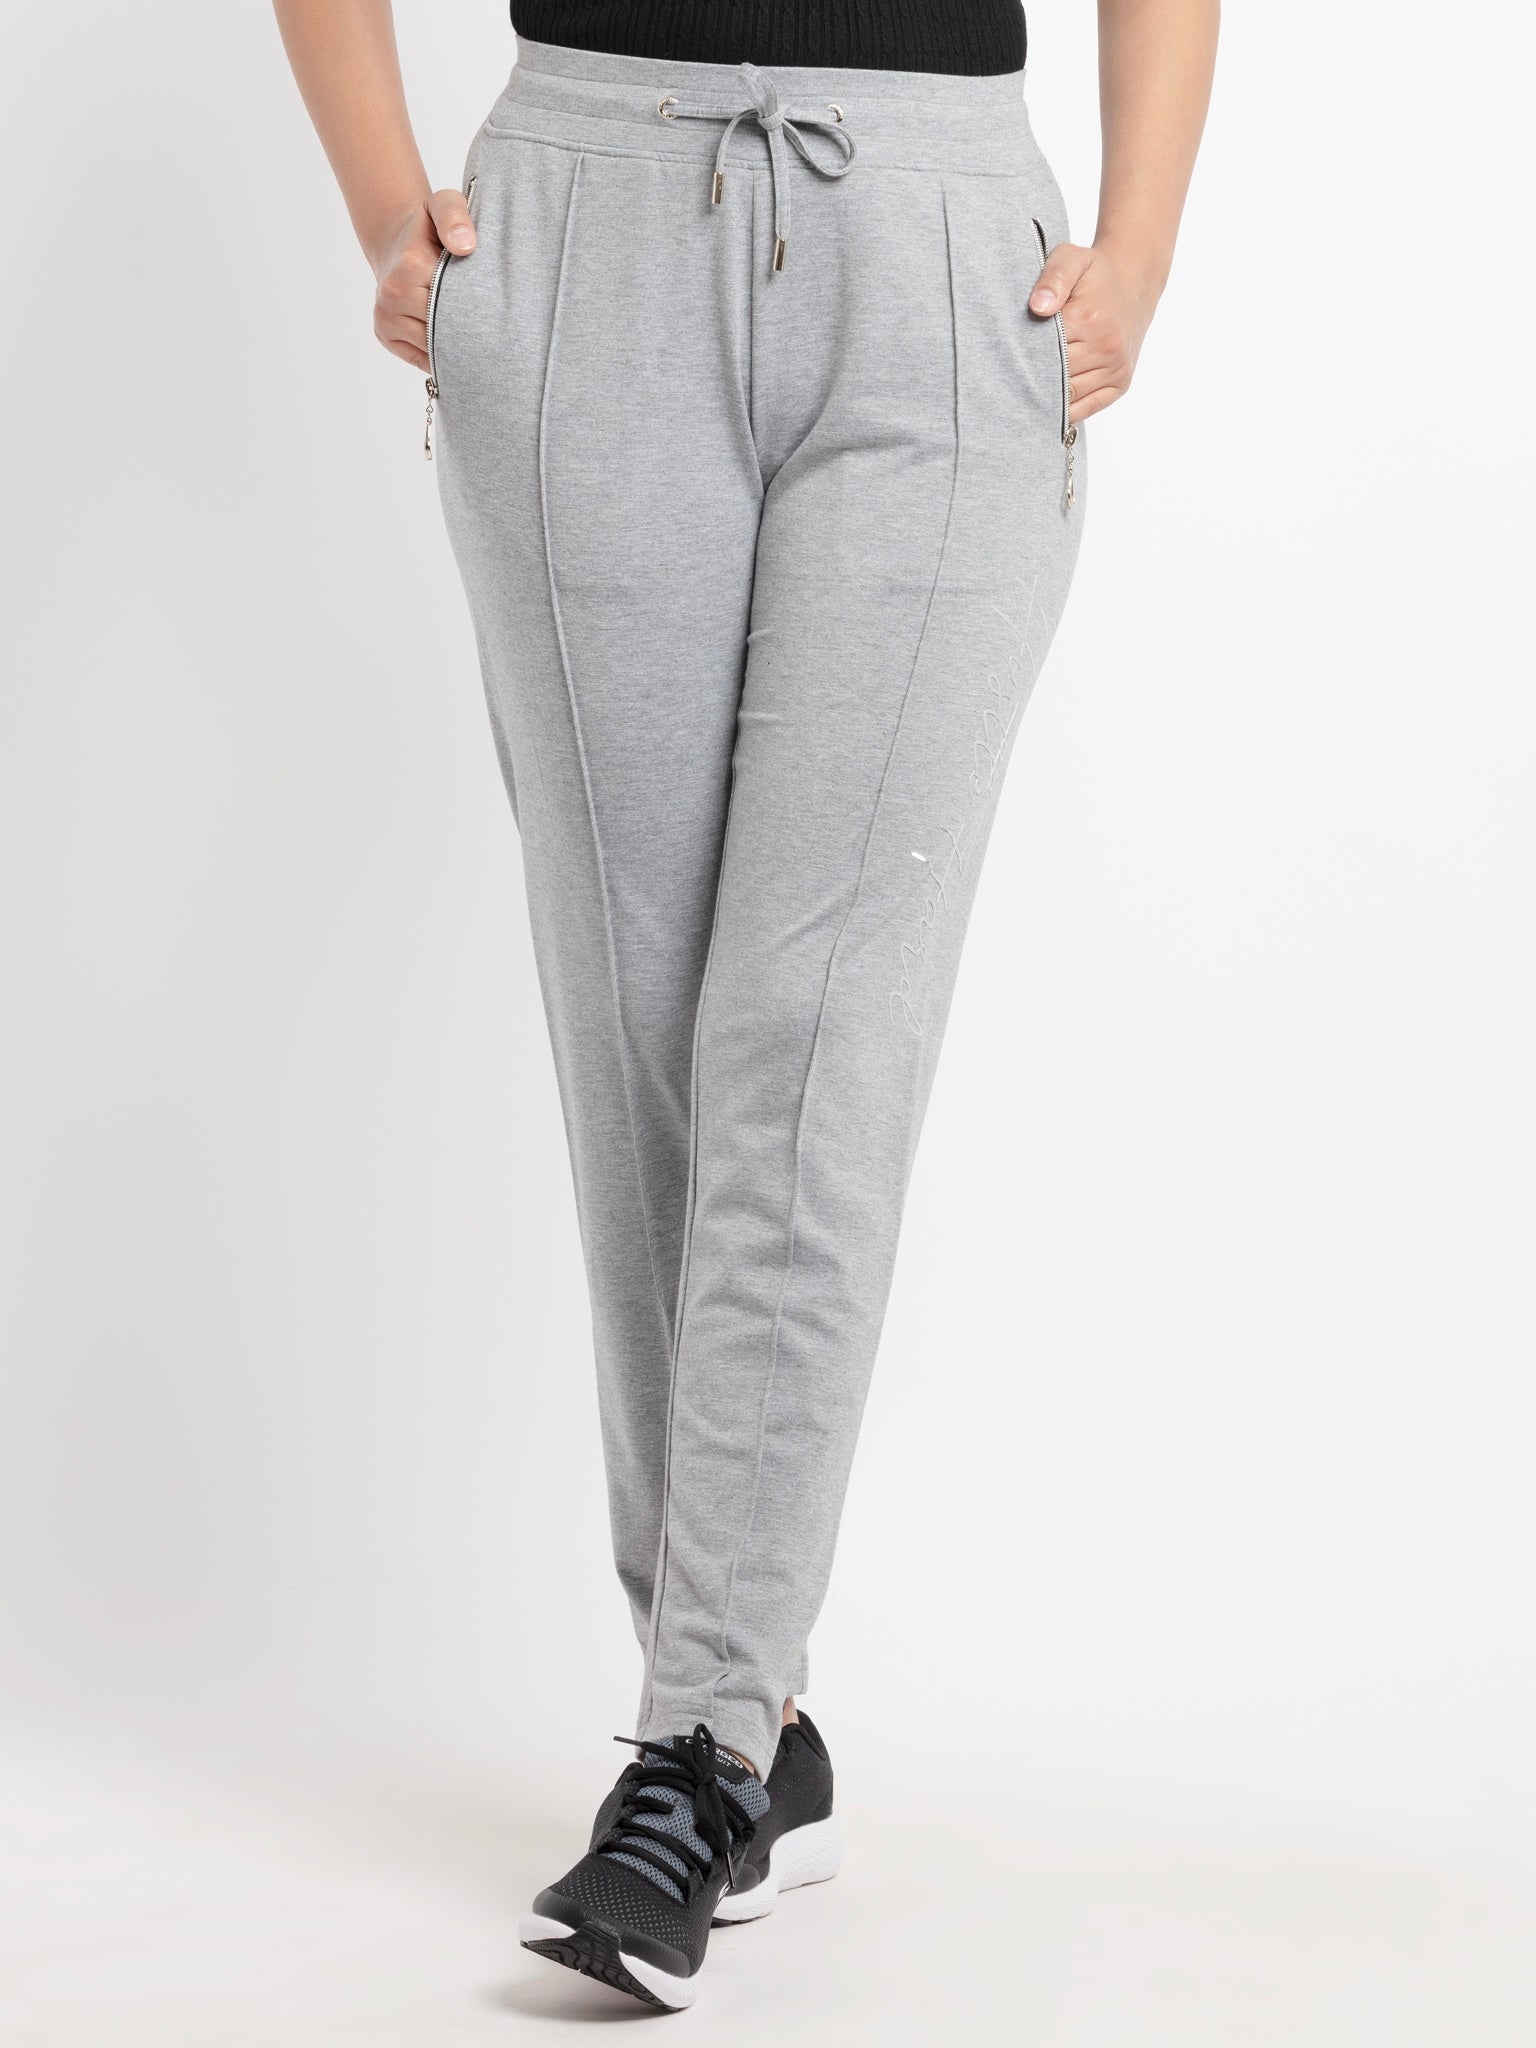 Status Quo | Women'ss Ankle length Printed Joggers